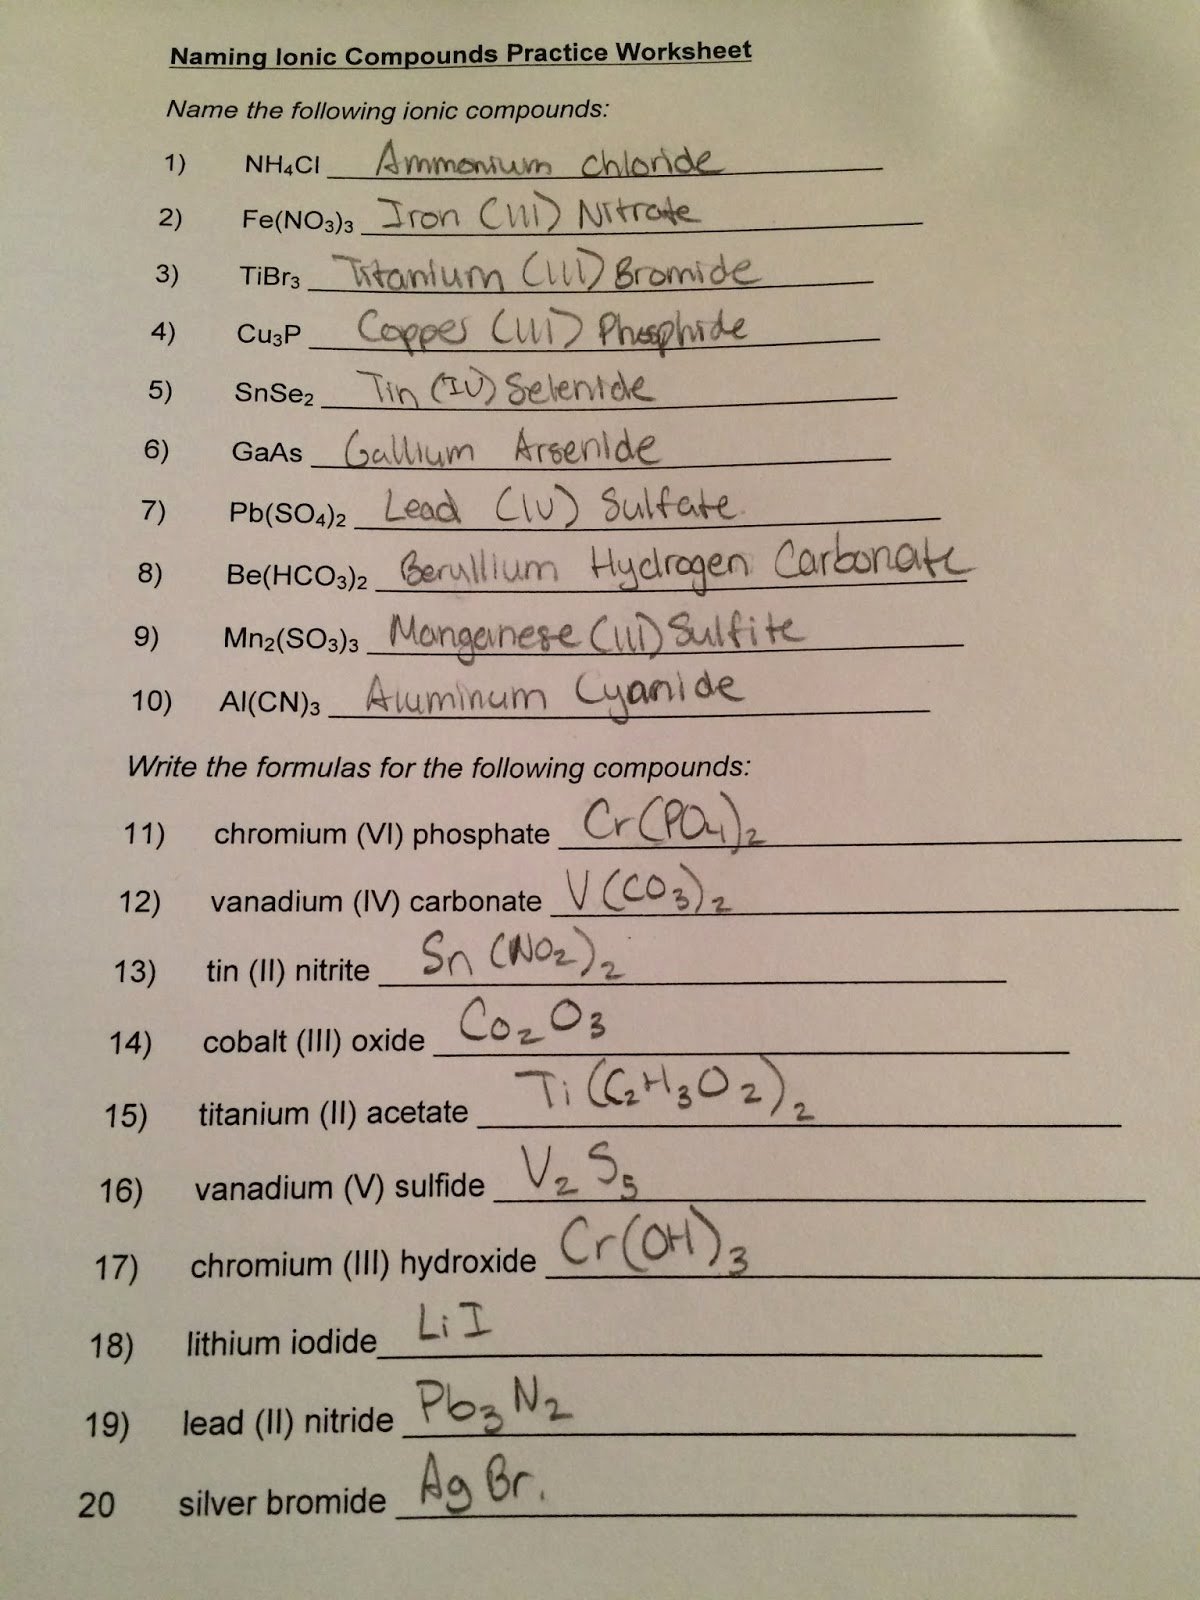 Naming Ionic Compounds Worksheet Answers Awesome 54 Naming Ionic and Covalent Pounds Worksheet Best